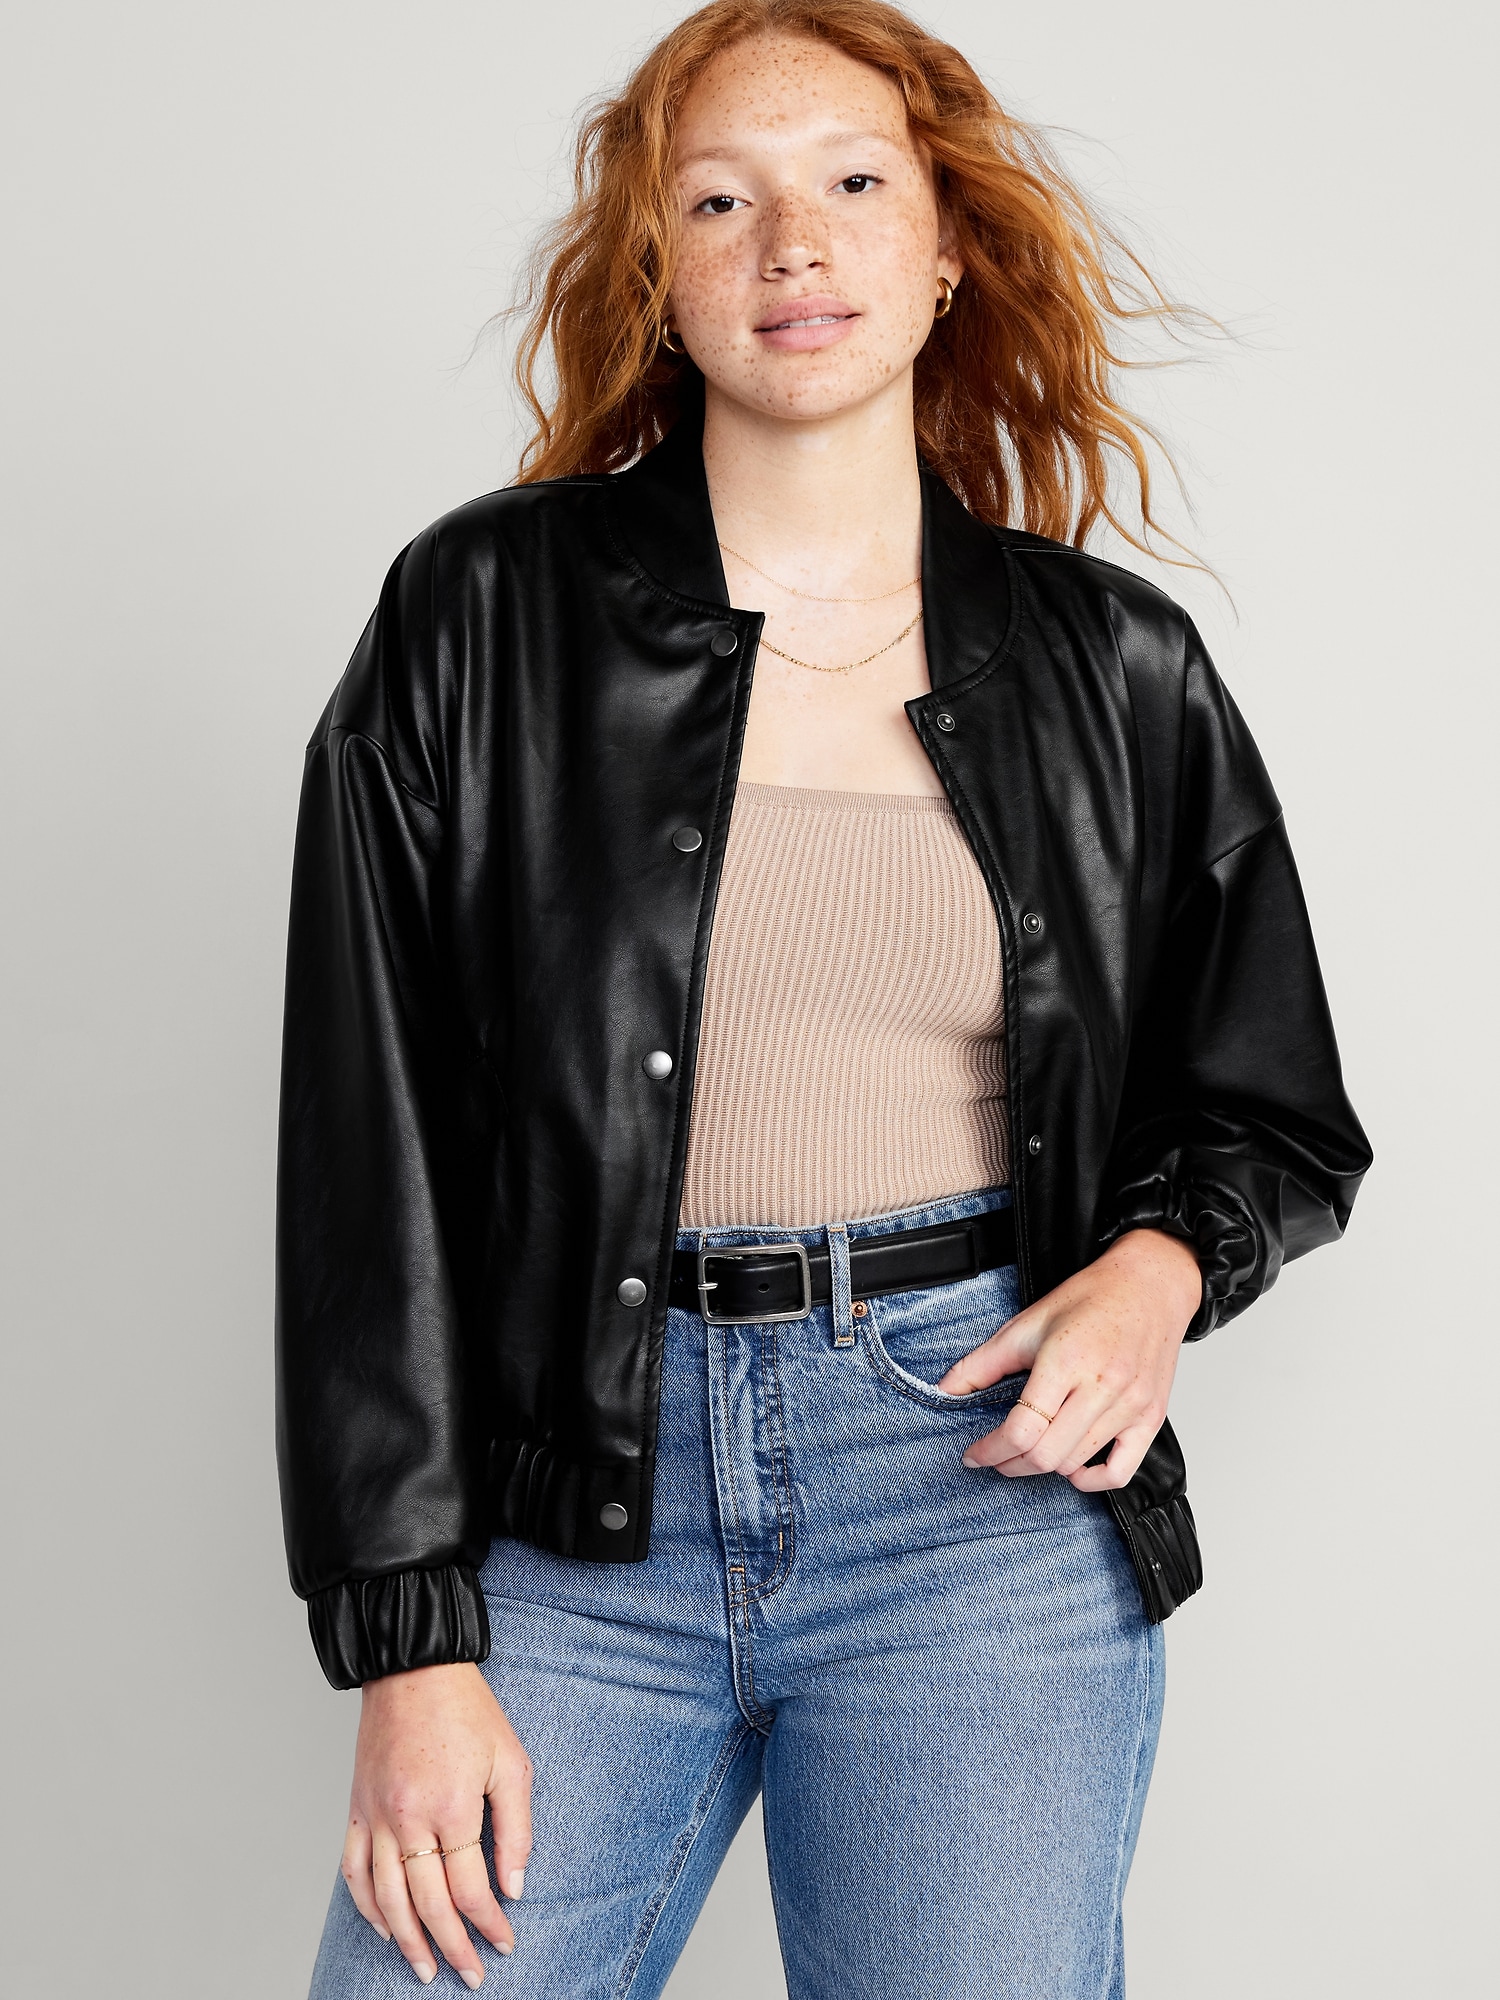 The 8 Popular Ways to Style a Women's Bomber Jacket-cokhiquangminh.vn